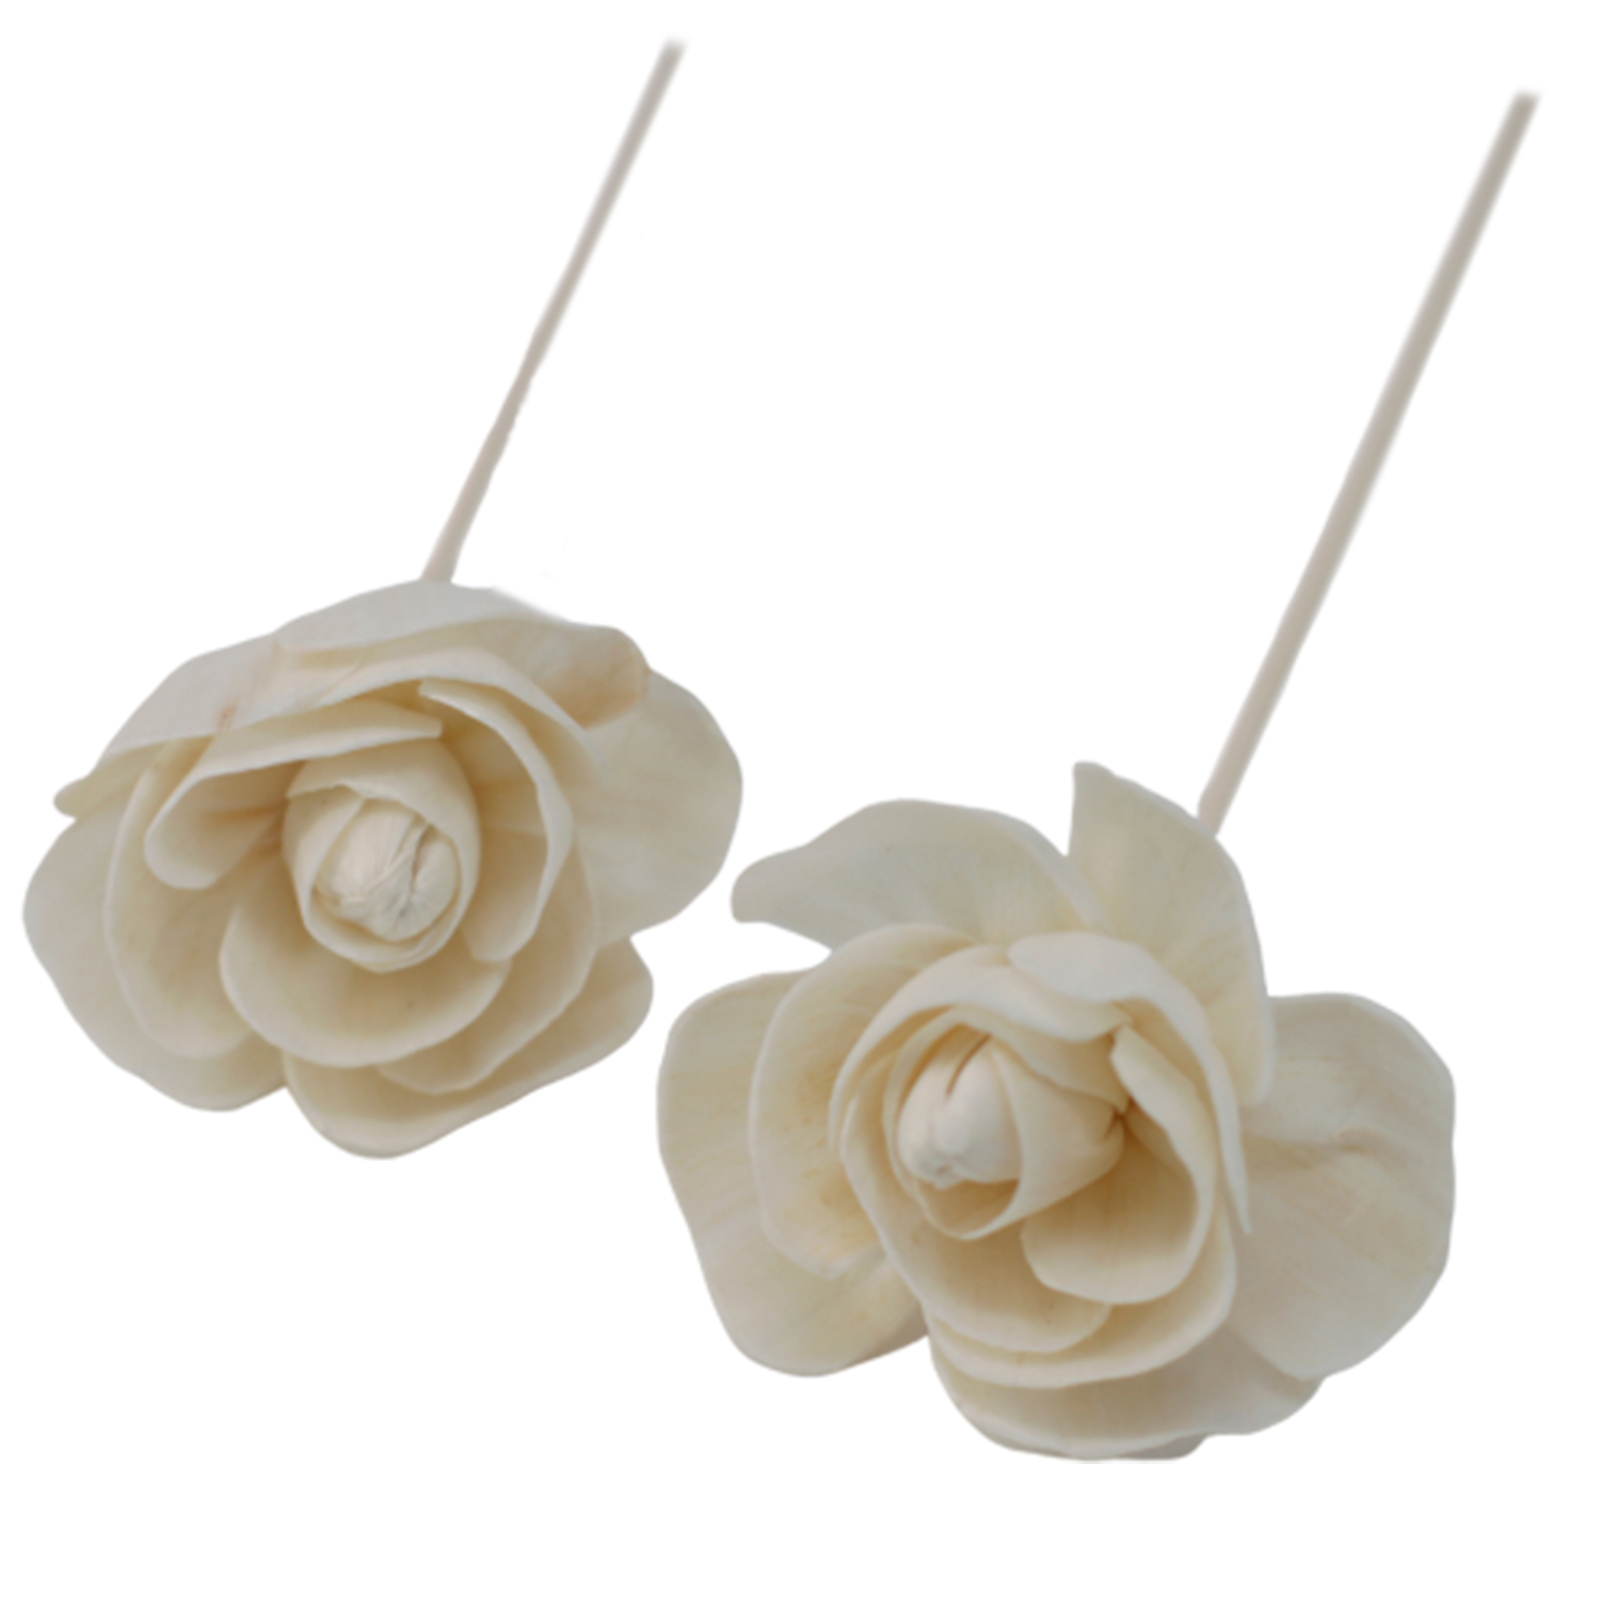 12 x Natural Diffuser Flowers - Rose on Reed